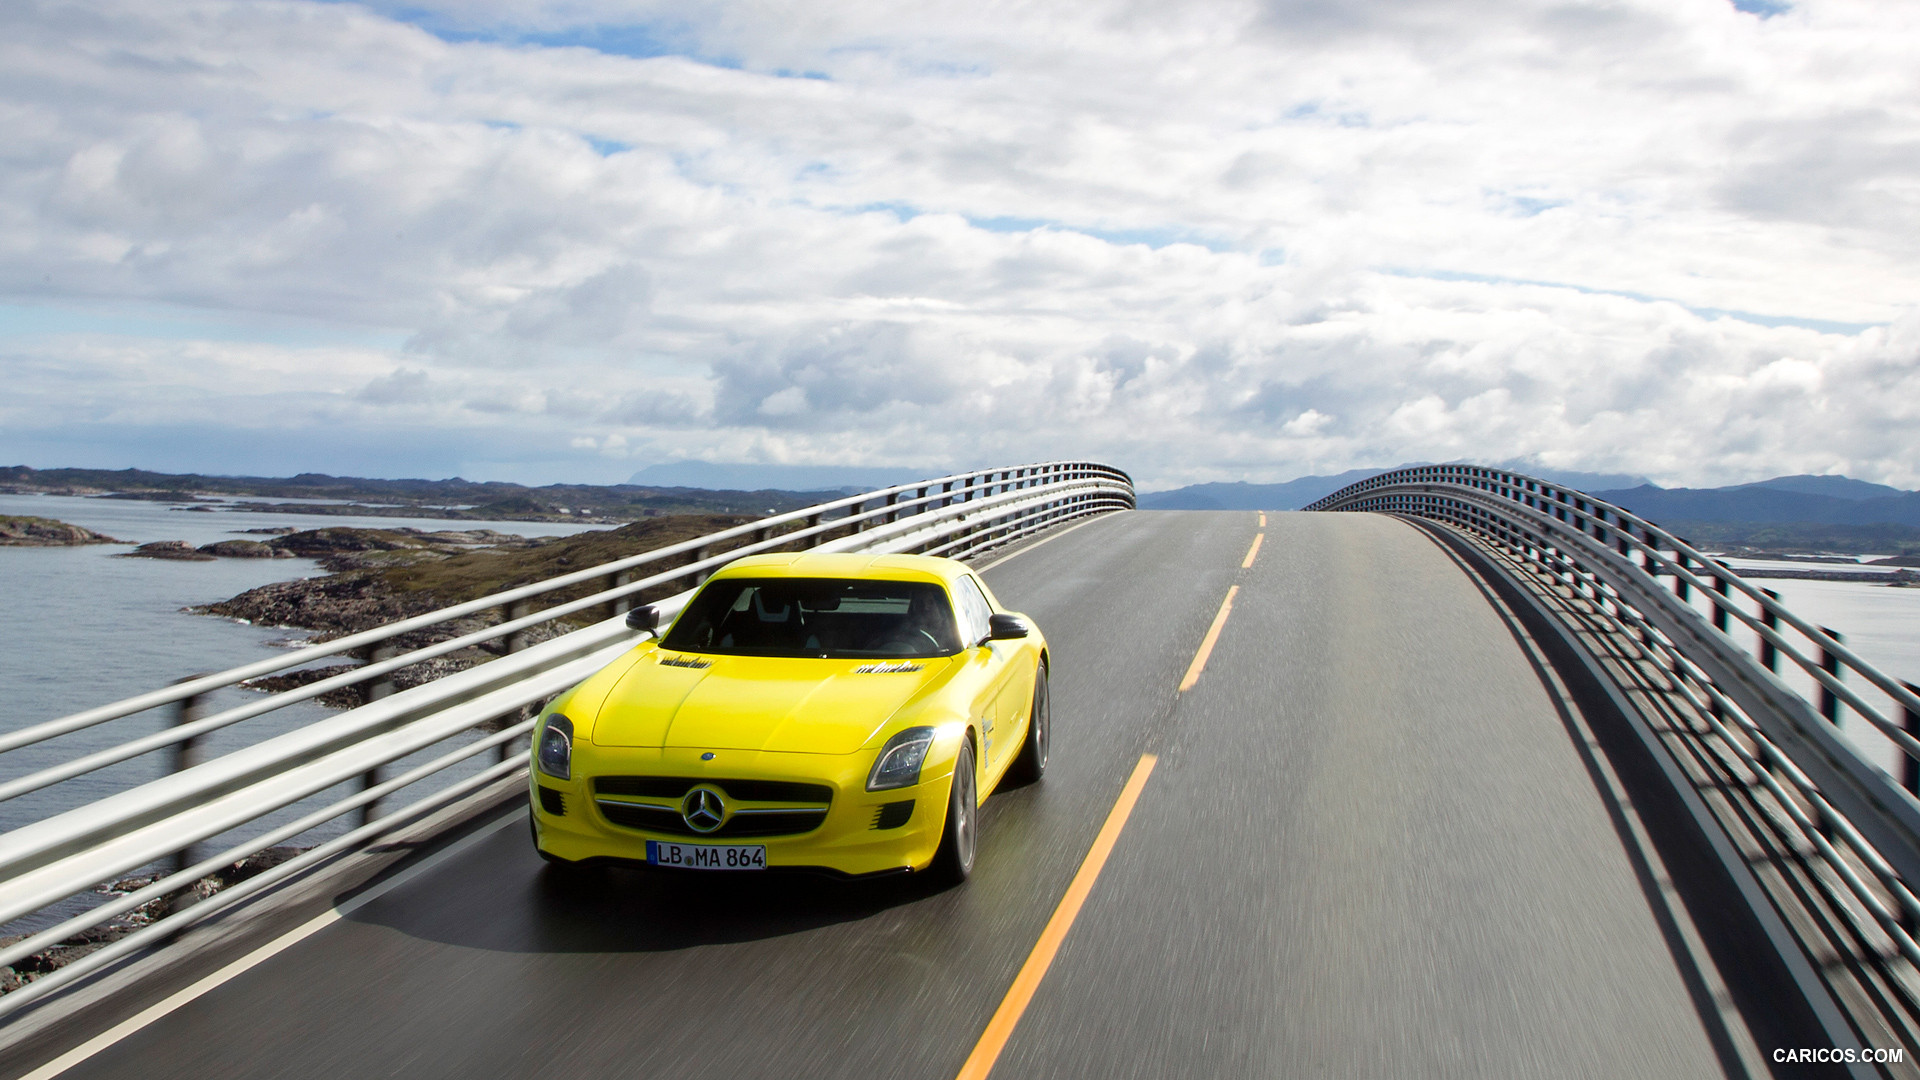 Mercedes-Benz SLS AMG E-CELL Concept  - Front, #8 of 60